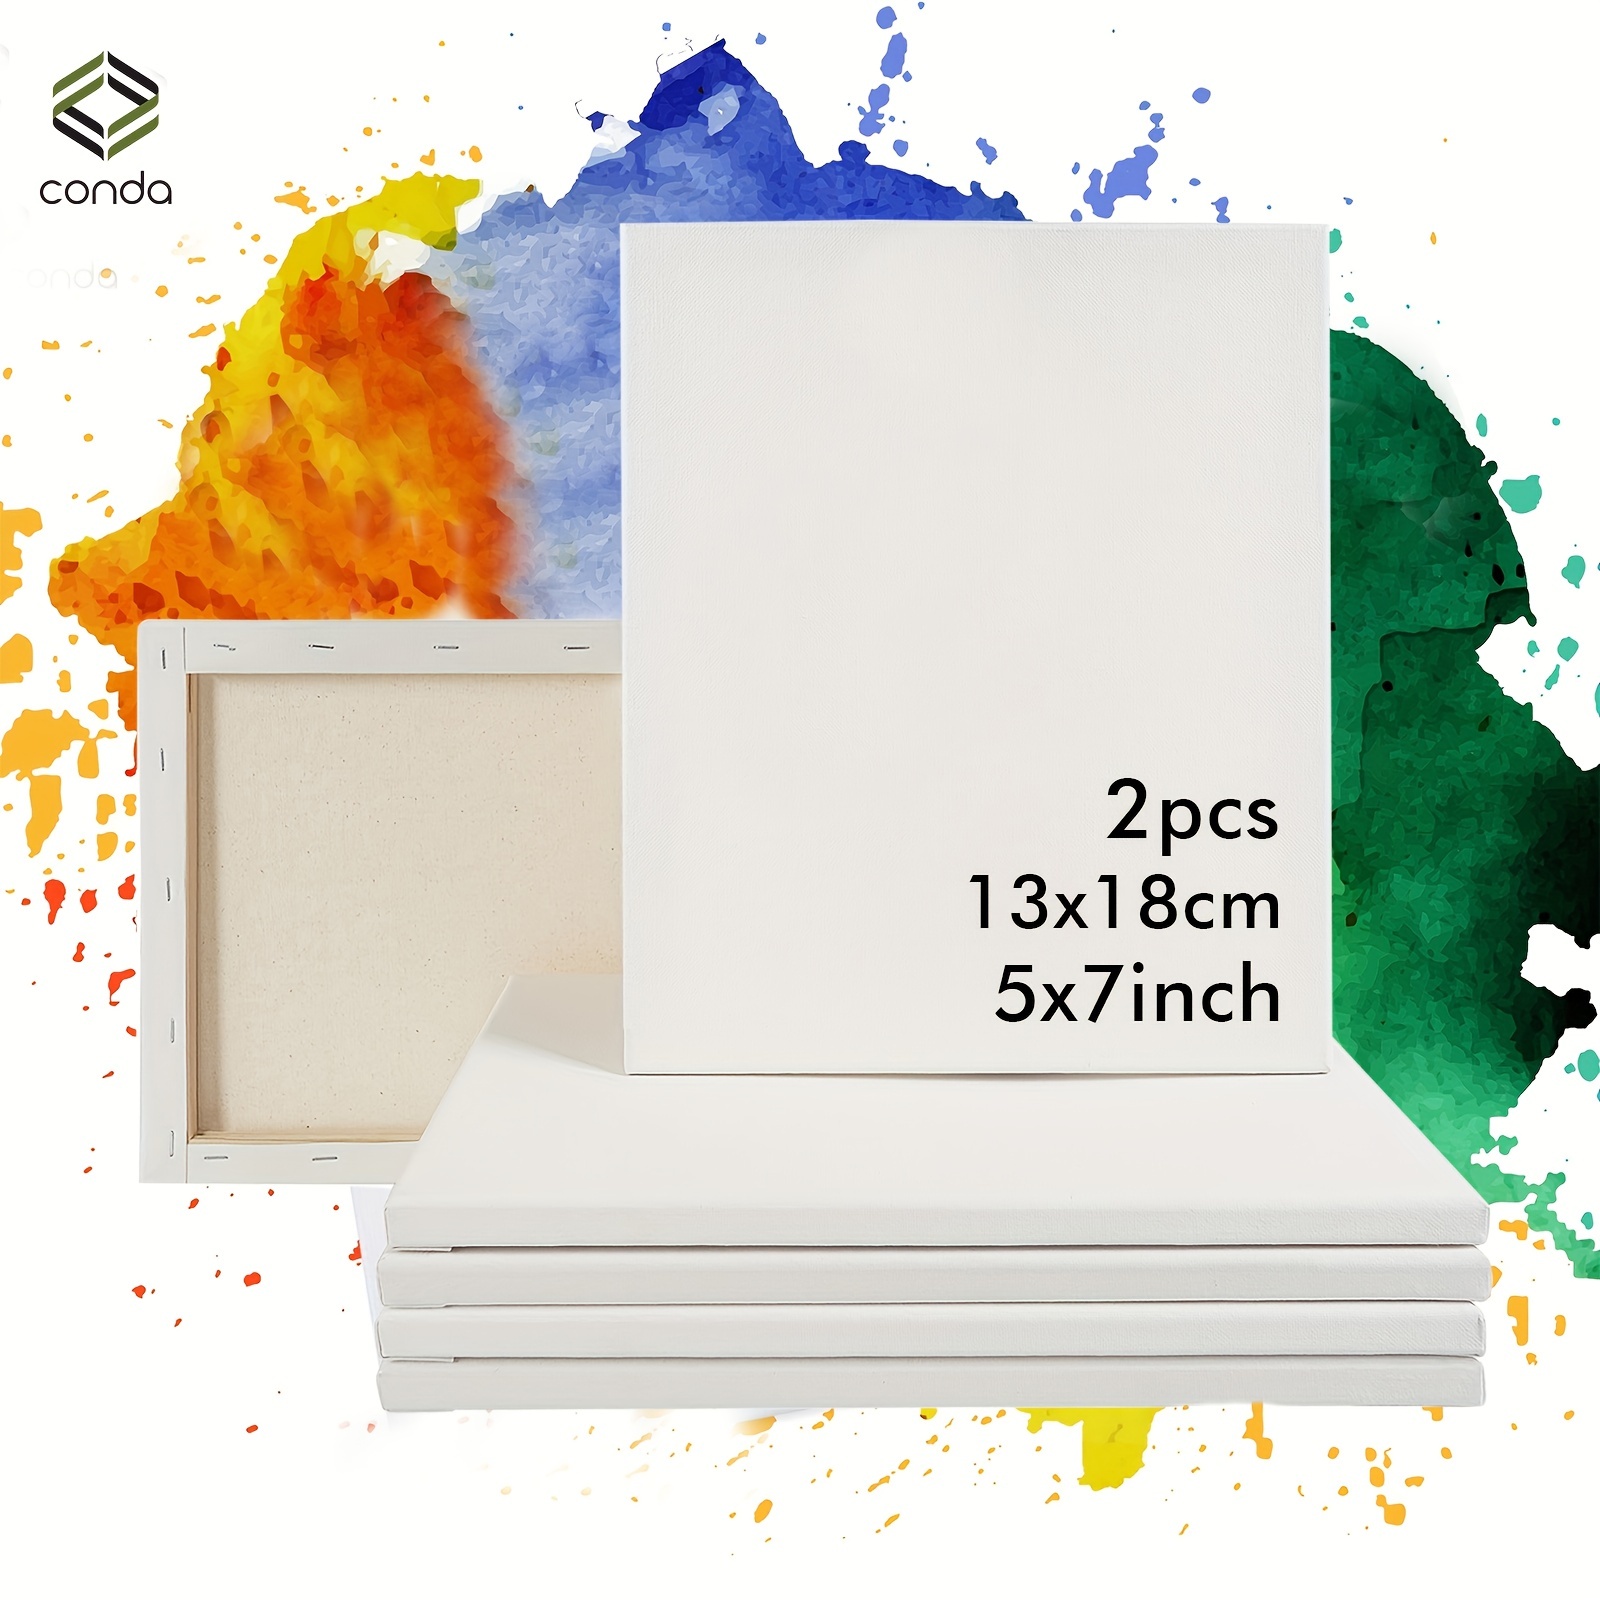 conda Canvases for Painting 5 x 7 inch, 24 Pack Value Bulk Blank White  Canvas Boards, Primed, 100% Cotton, Quality Acid Free Artist Canvas Panels  for